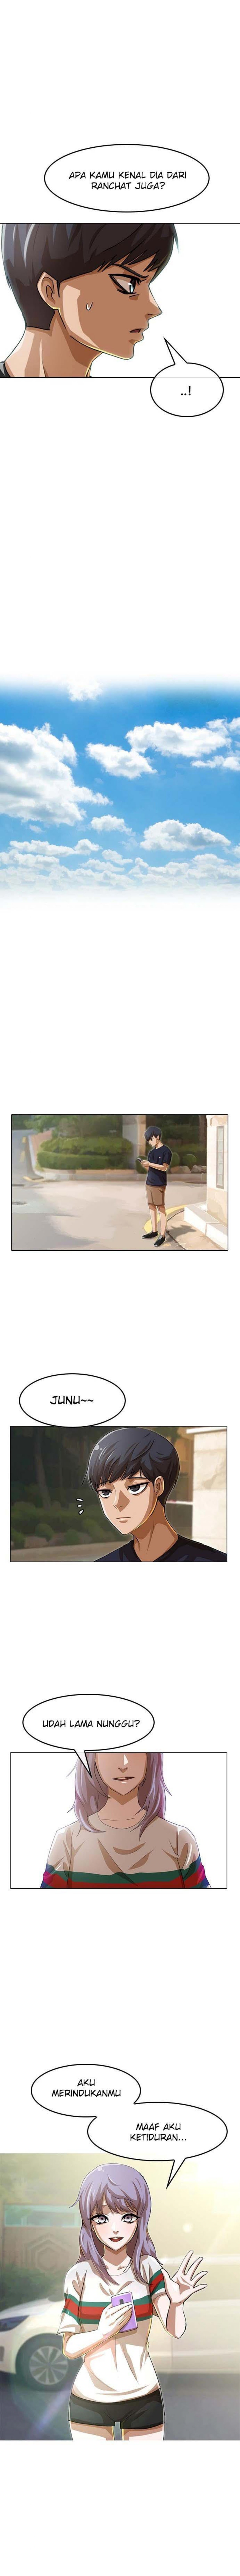 The Girl from Random Chatting! Chapter 51